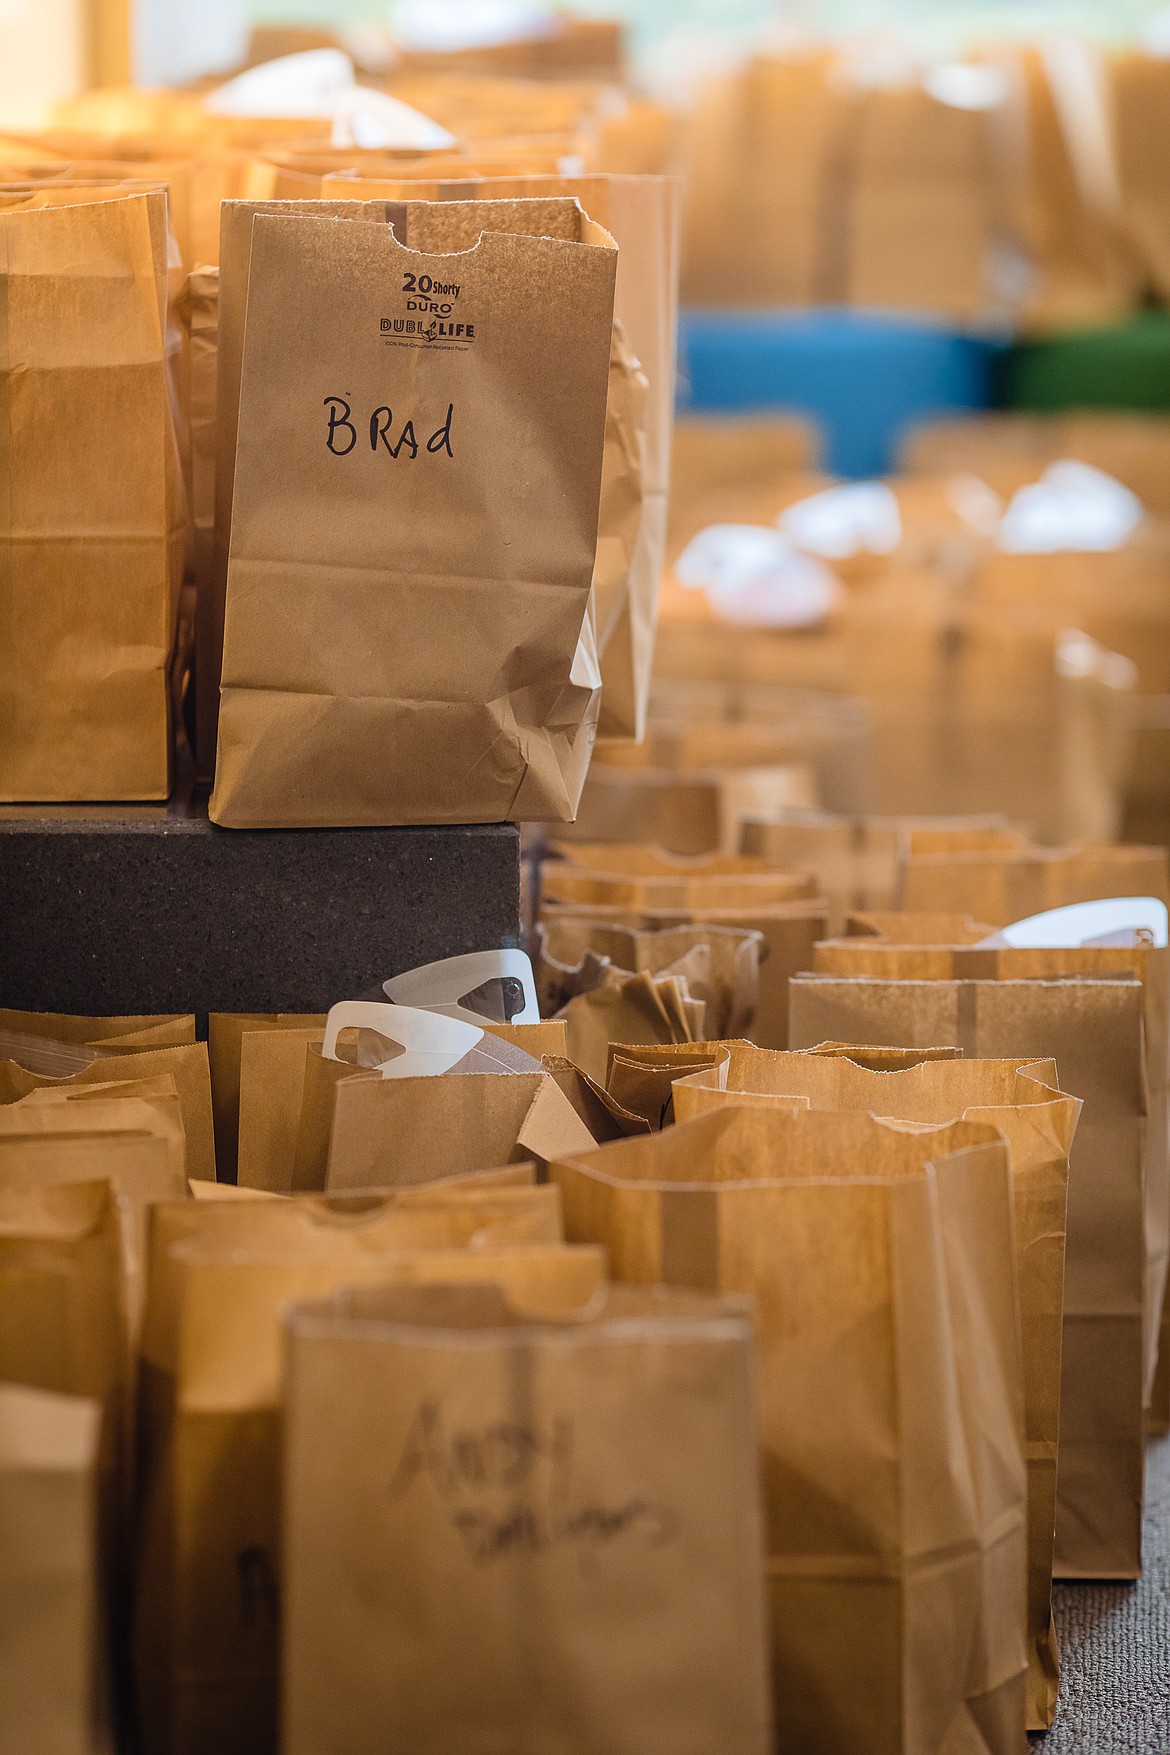 A waiting area on 3 East was repurposed to house N-95 respirators fresh from the sterilizer. After masks have been sterilized they are carefully placed in paper sacks with names hand-written on the outside, awaiting the next shift.